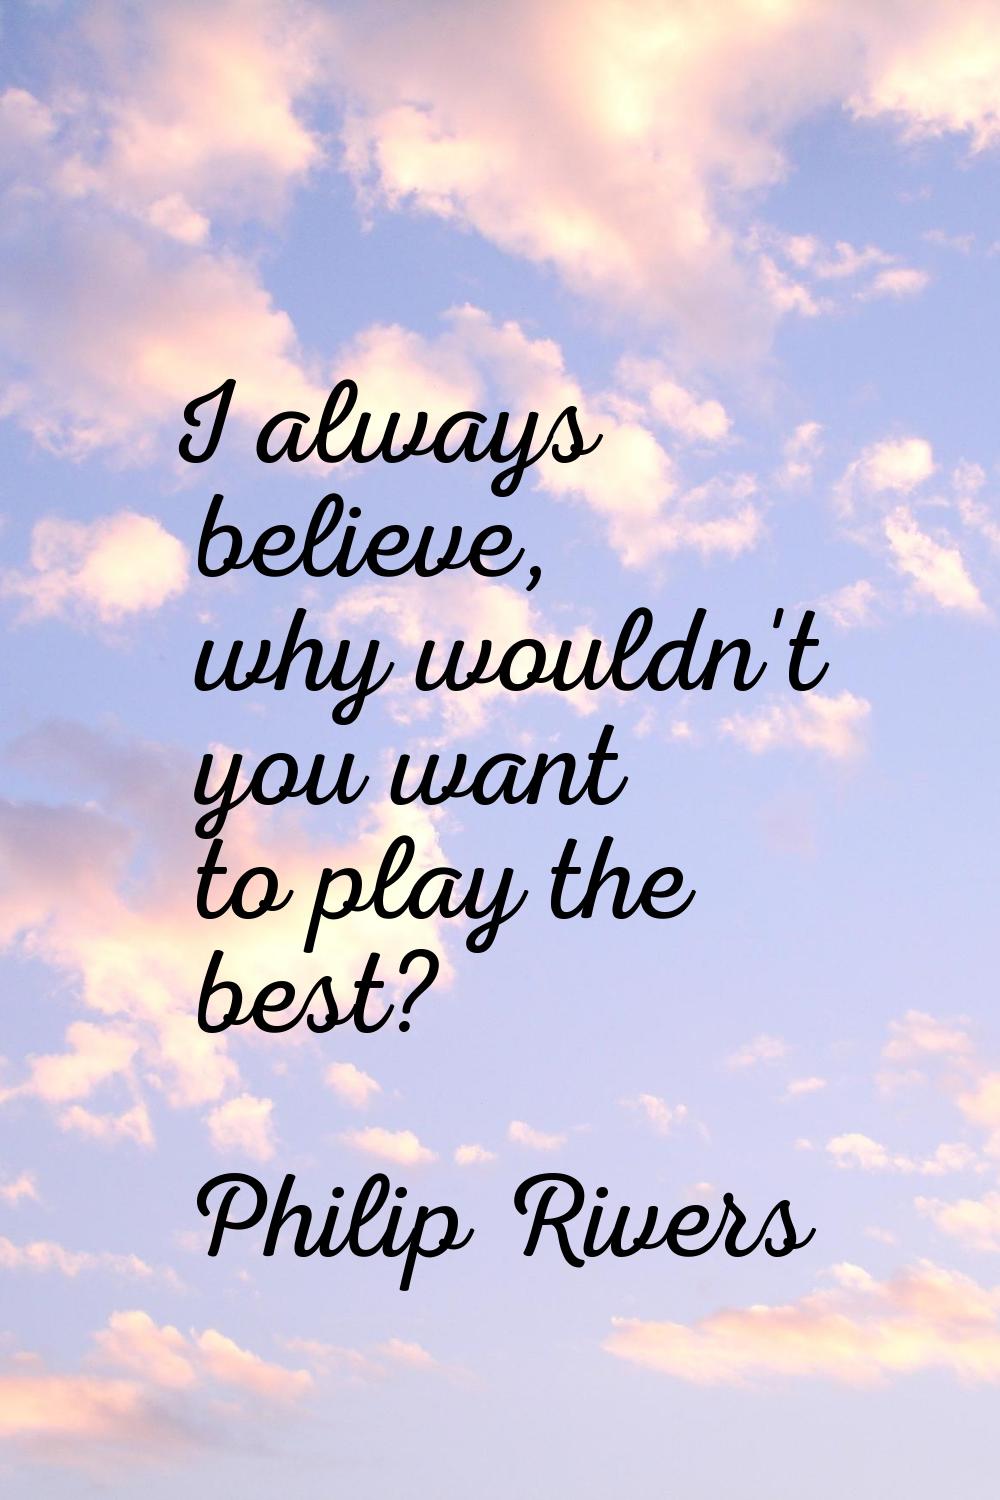 I always believe, why wouldn't you want to play the best?